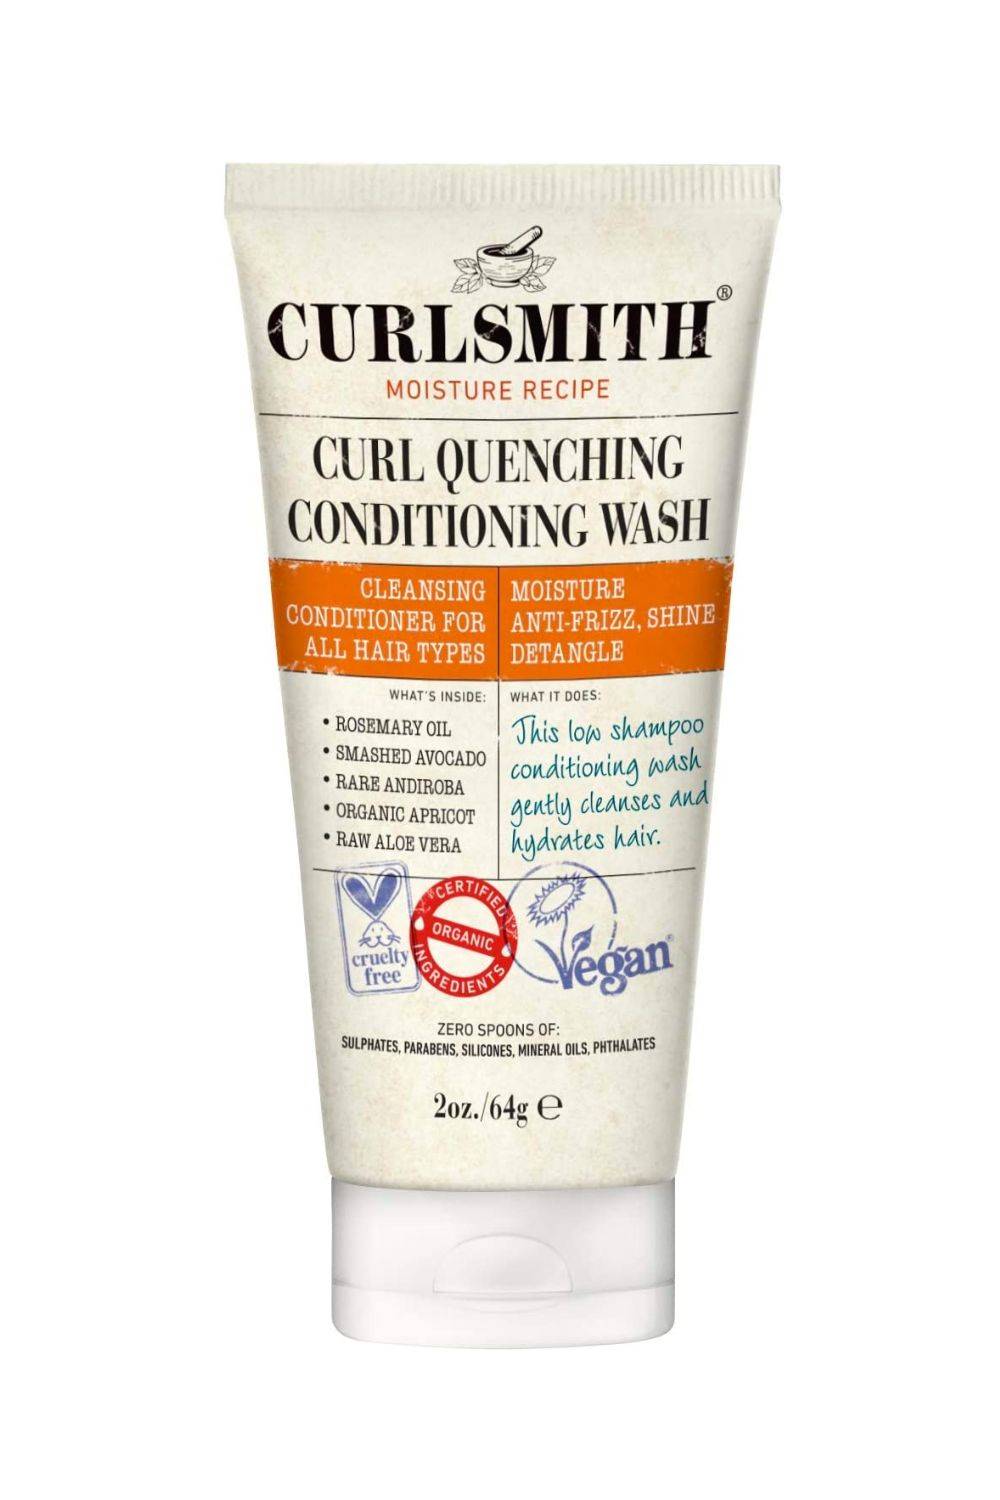 Curl Quenching Conditioning Wash de Curlsmith